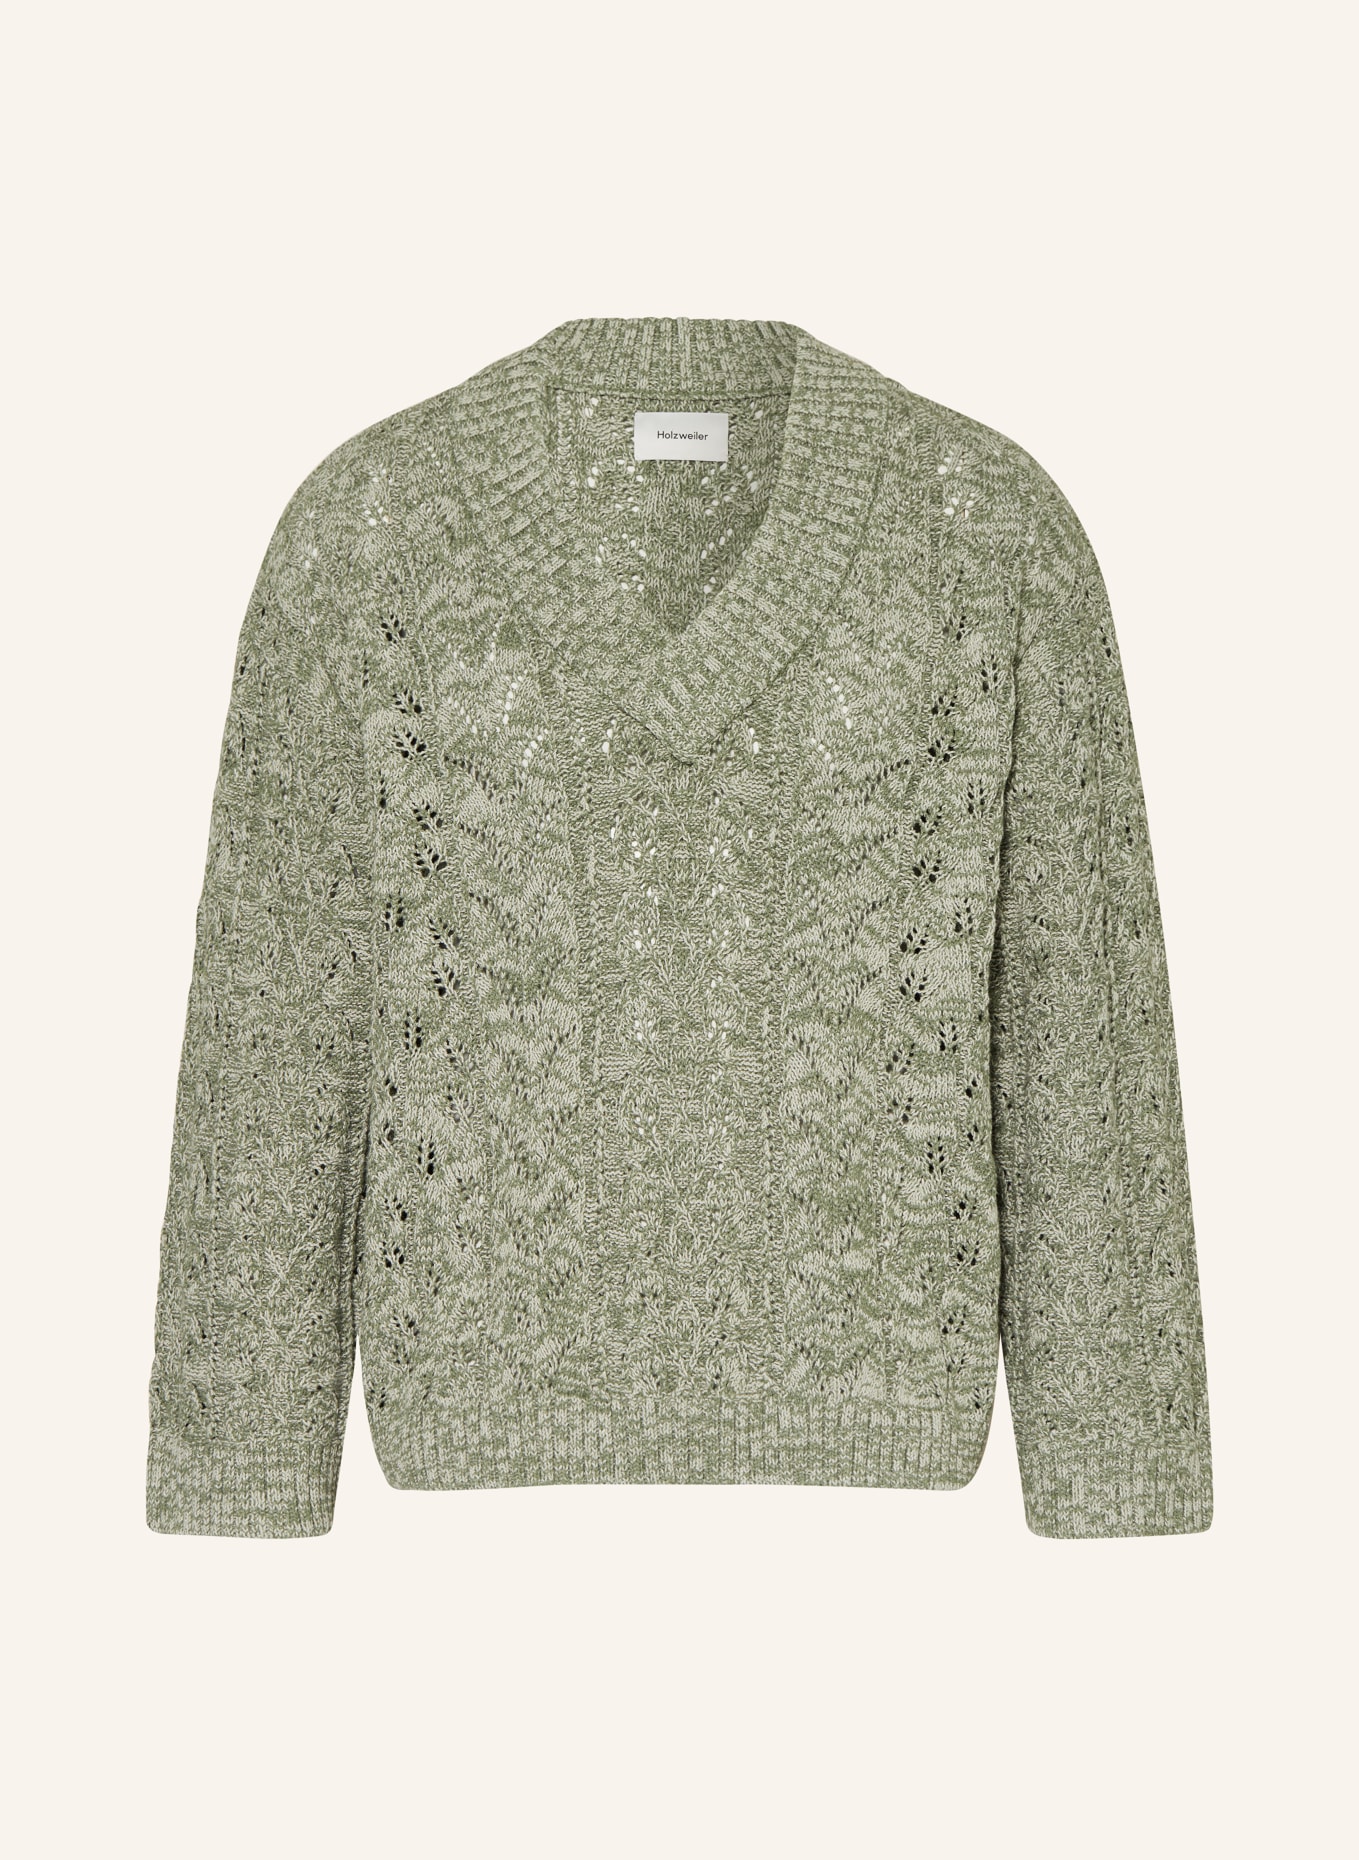 HOLZWEILER Sweater PALOMA, Color: GREEN/ LIGHT GRAY (Image 1)